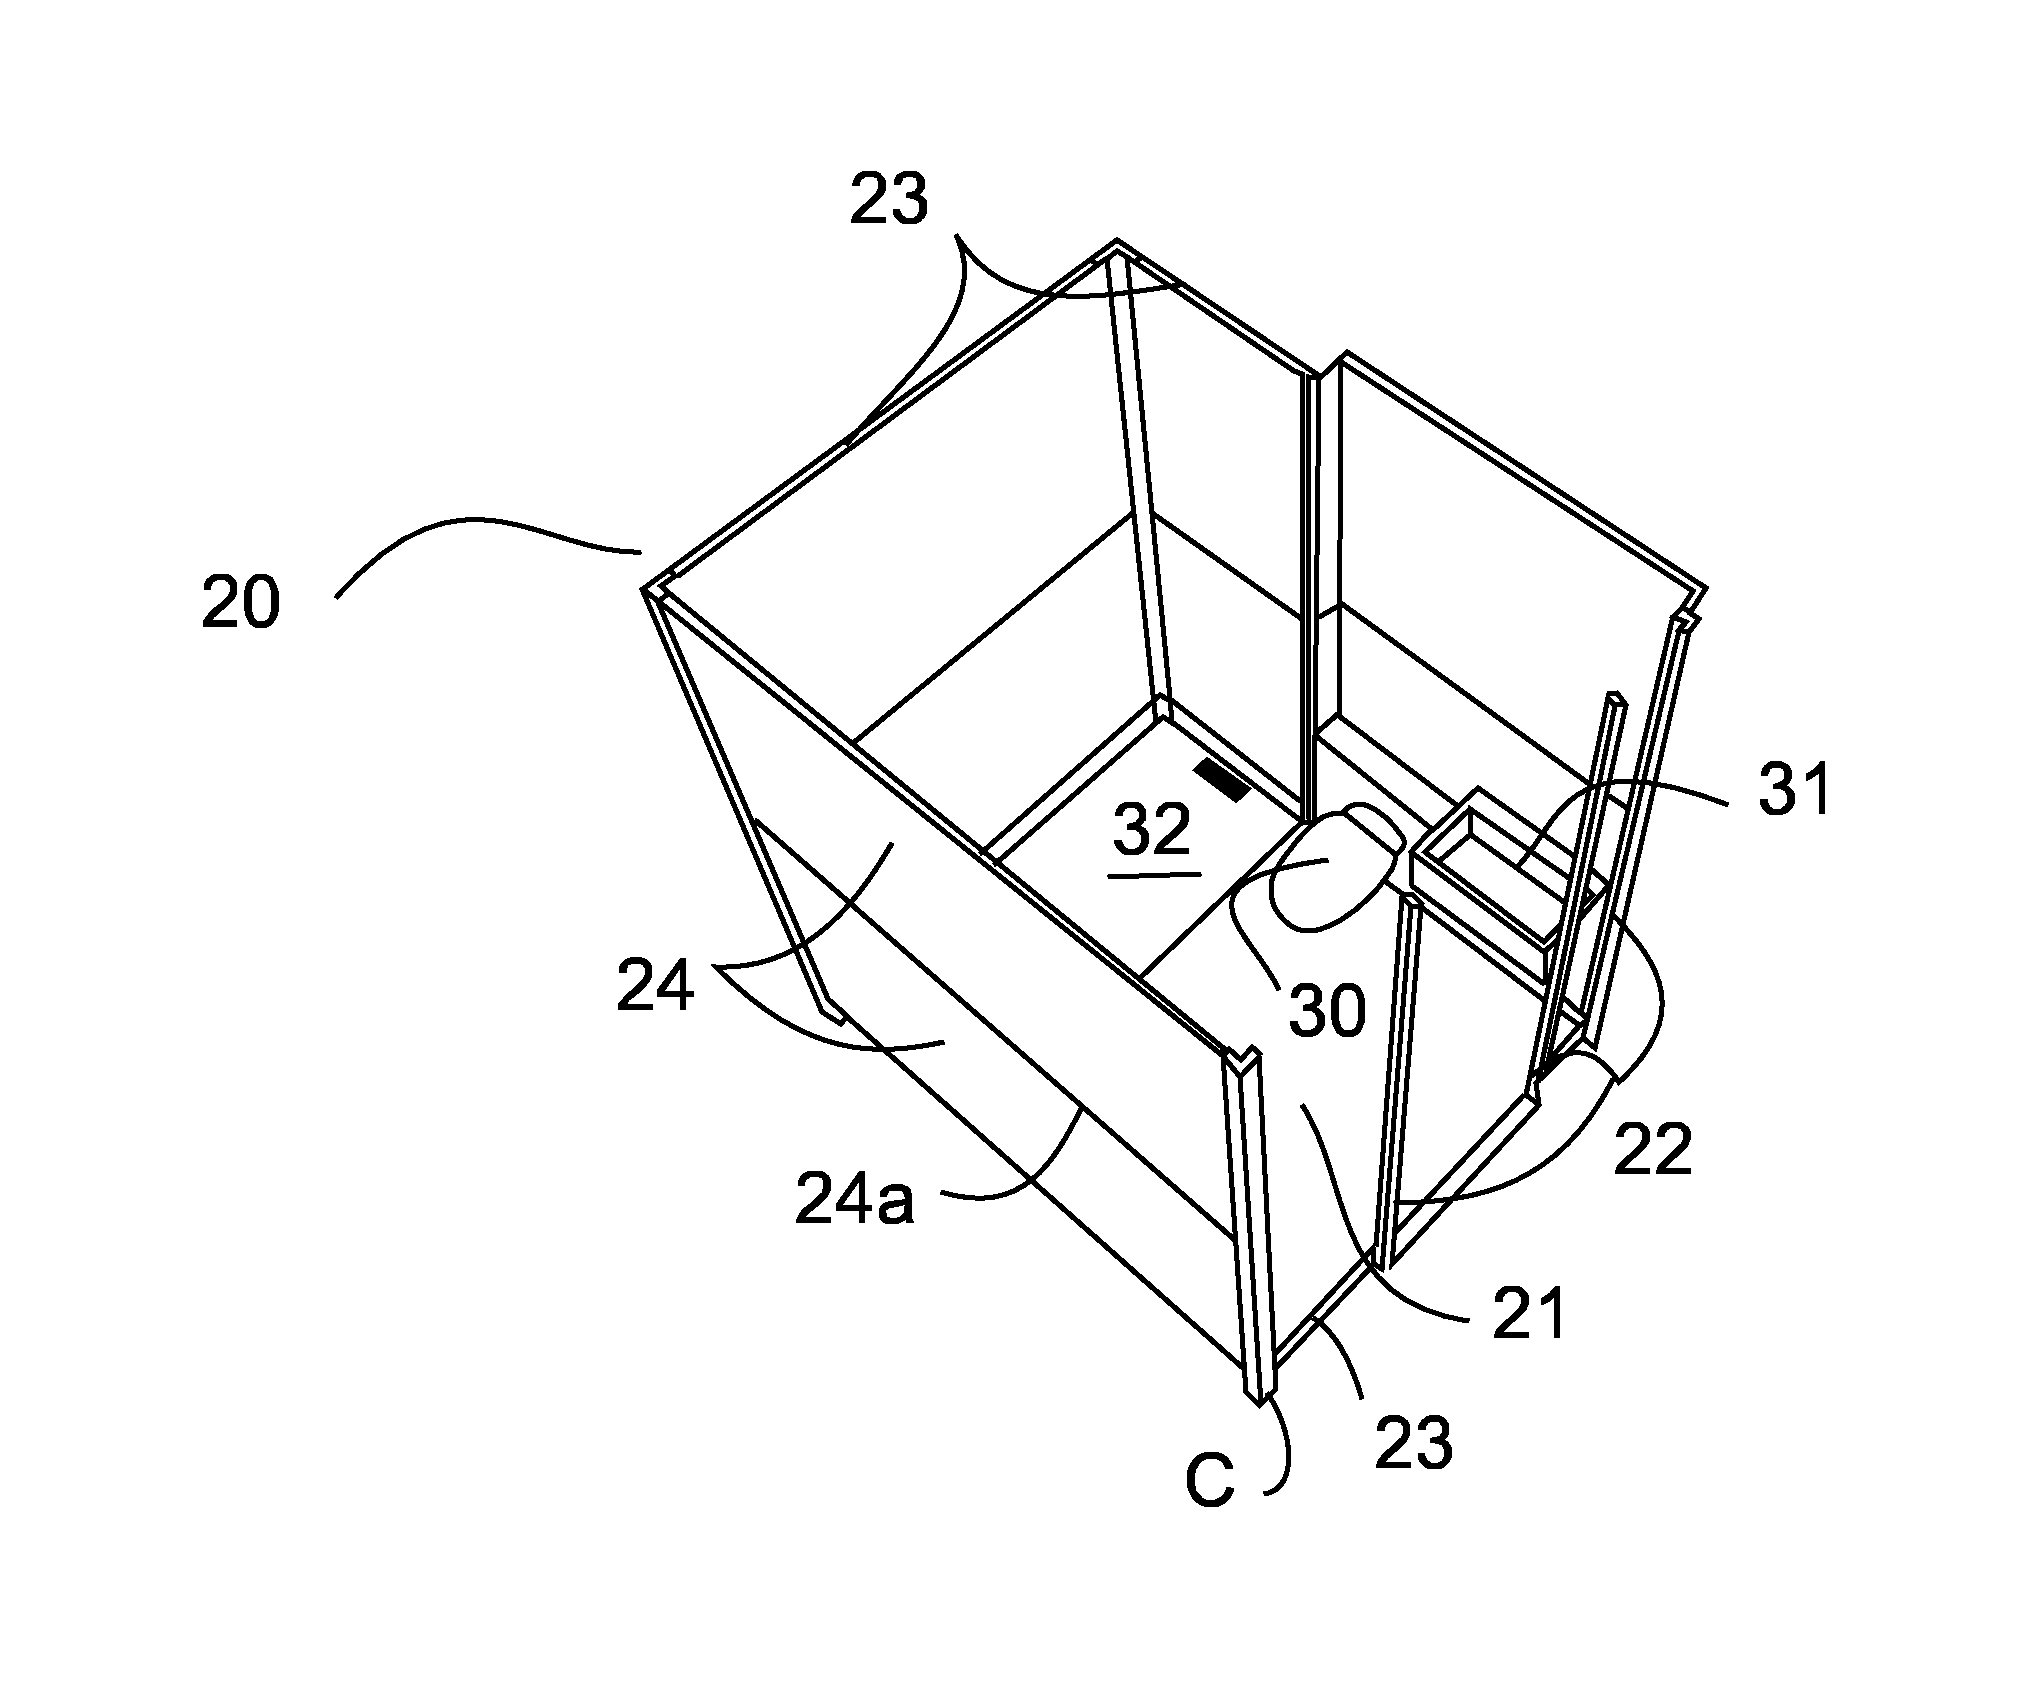 Arrangement for attaching panels to support structures, a construction support structure and fastening means, and their use in modular building elements